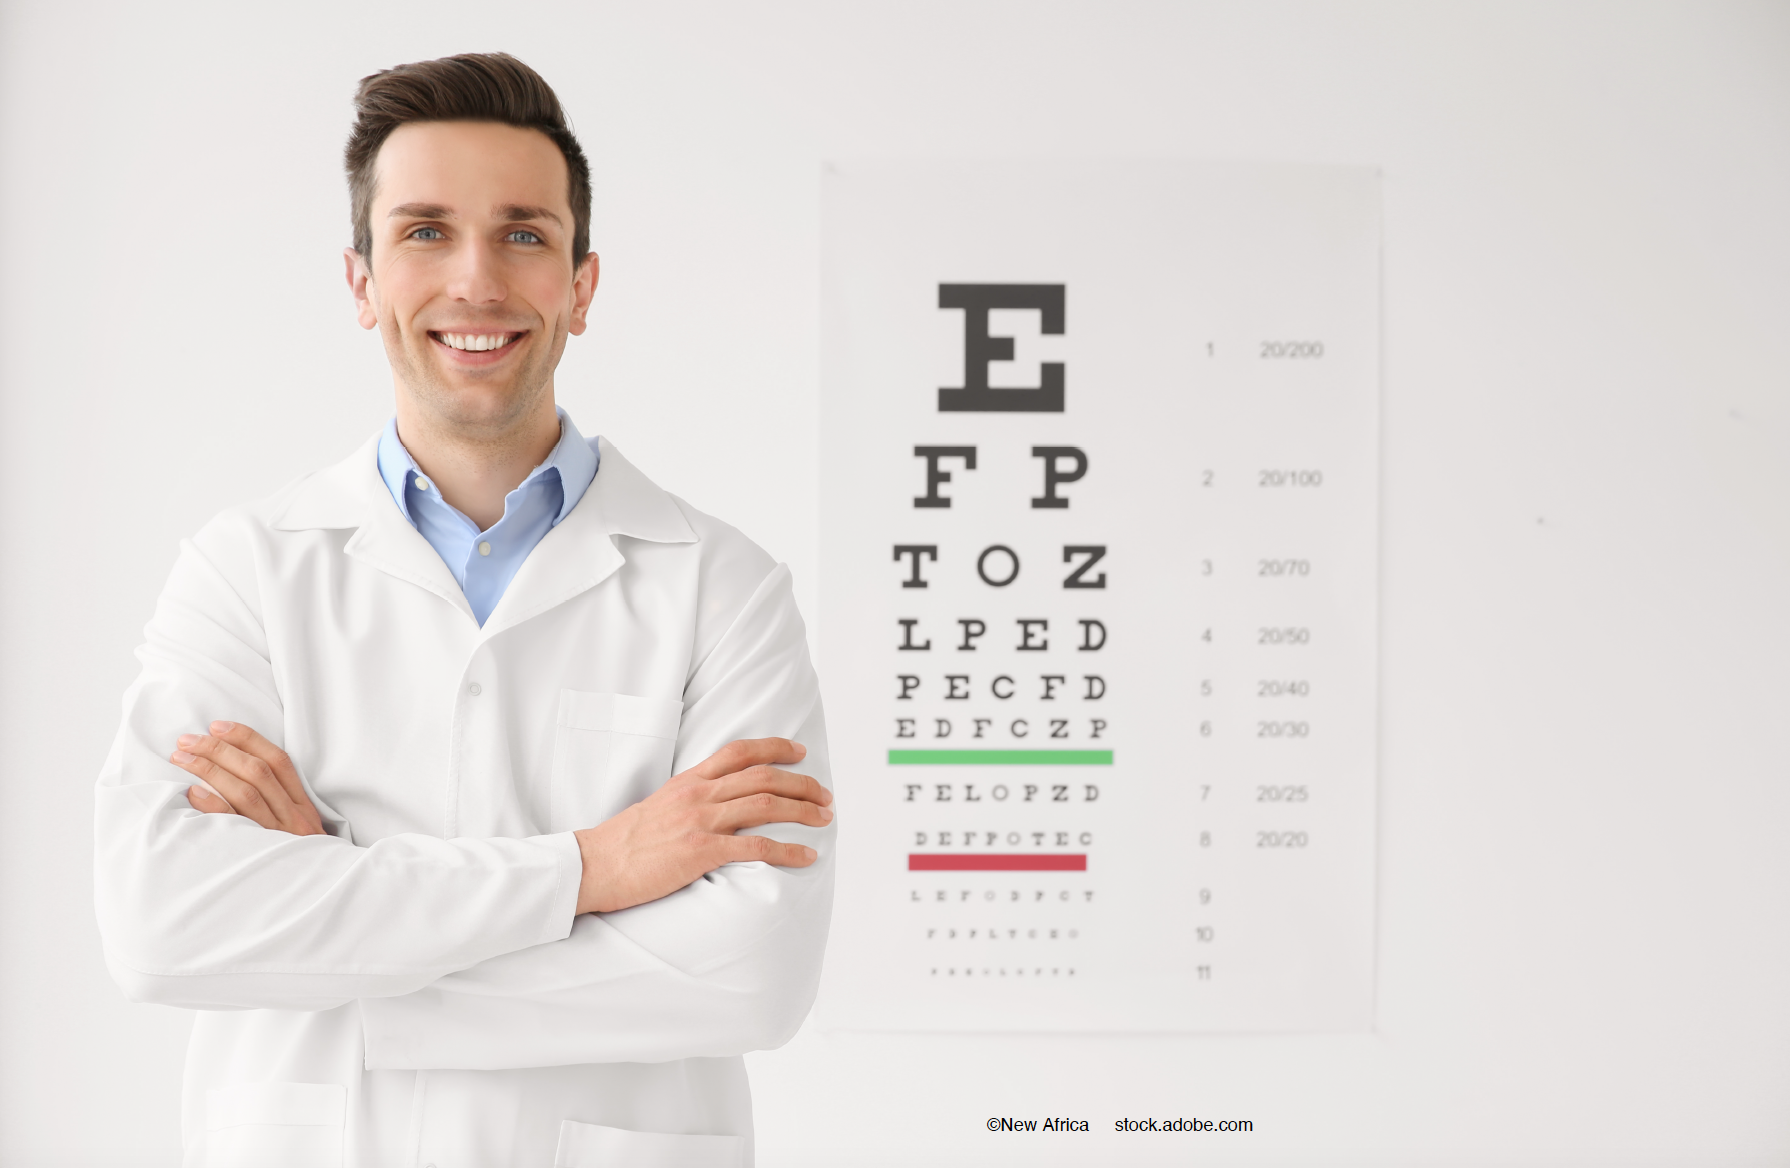 Private practice vs academics: What do young ophthalmologists need to know?